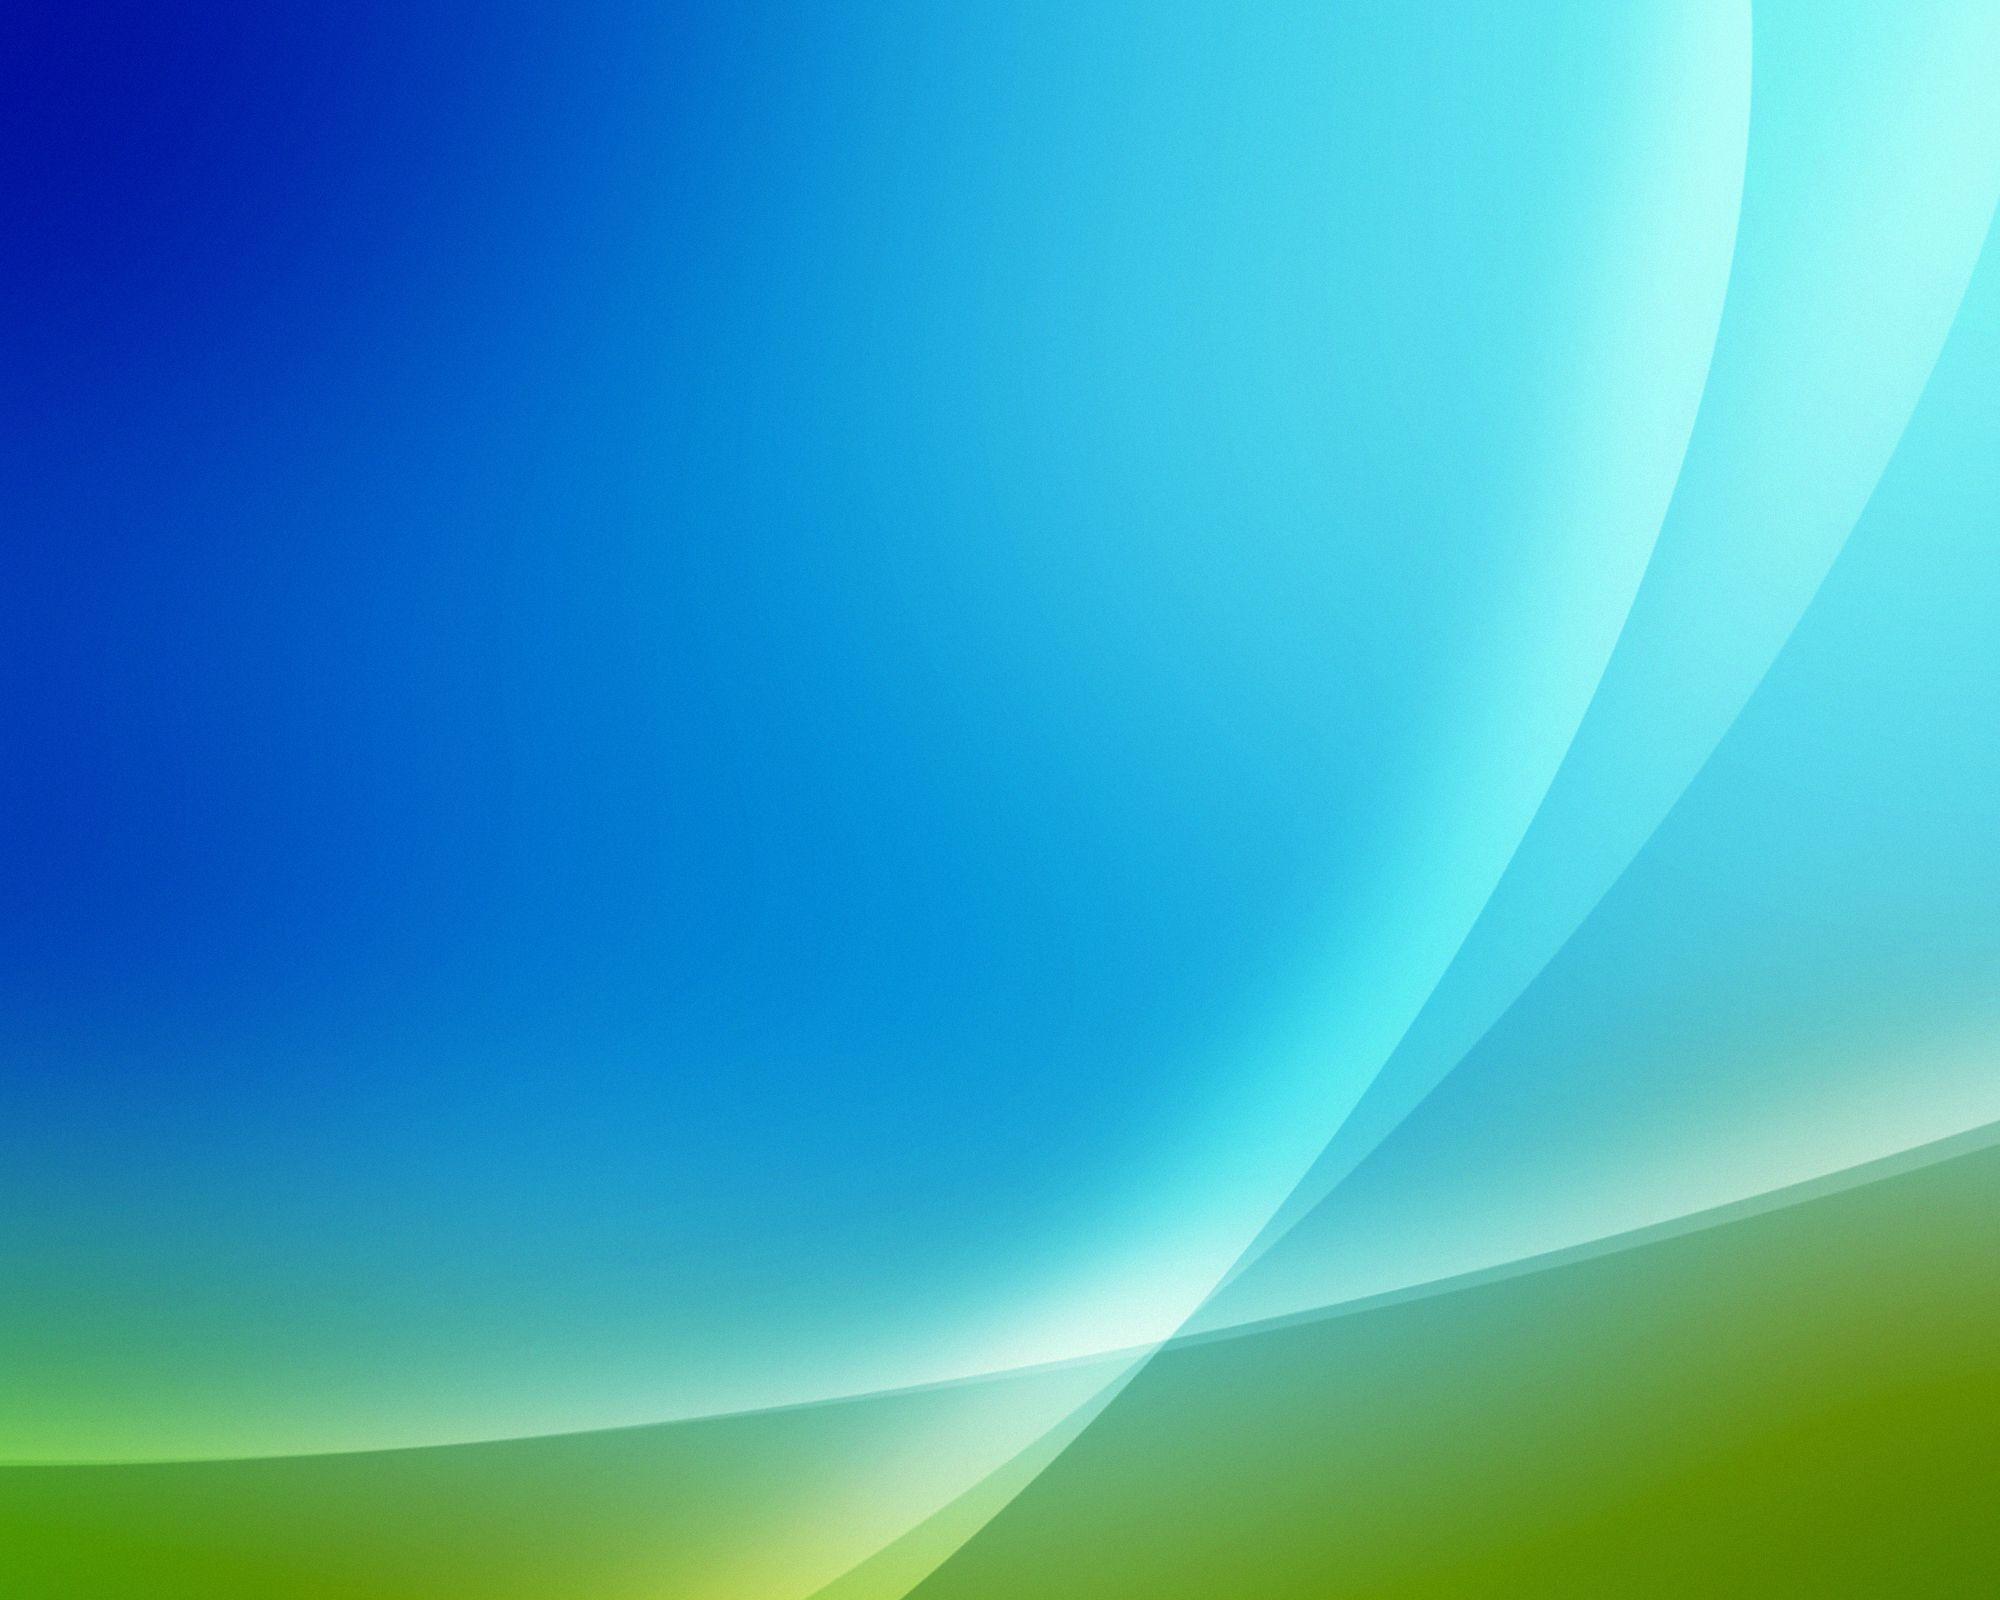 background green and blue